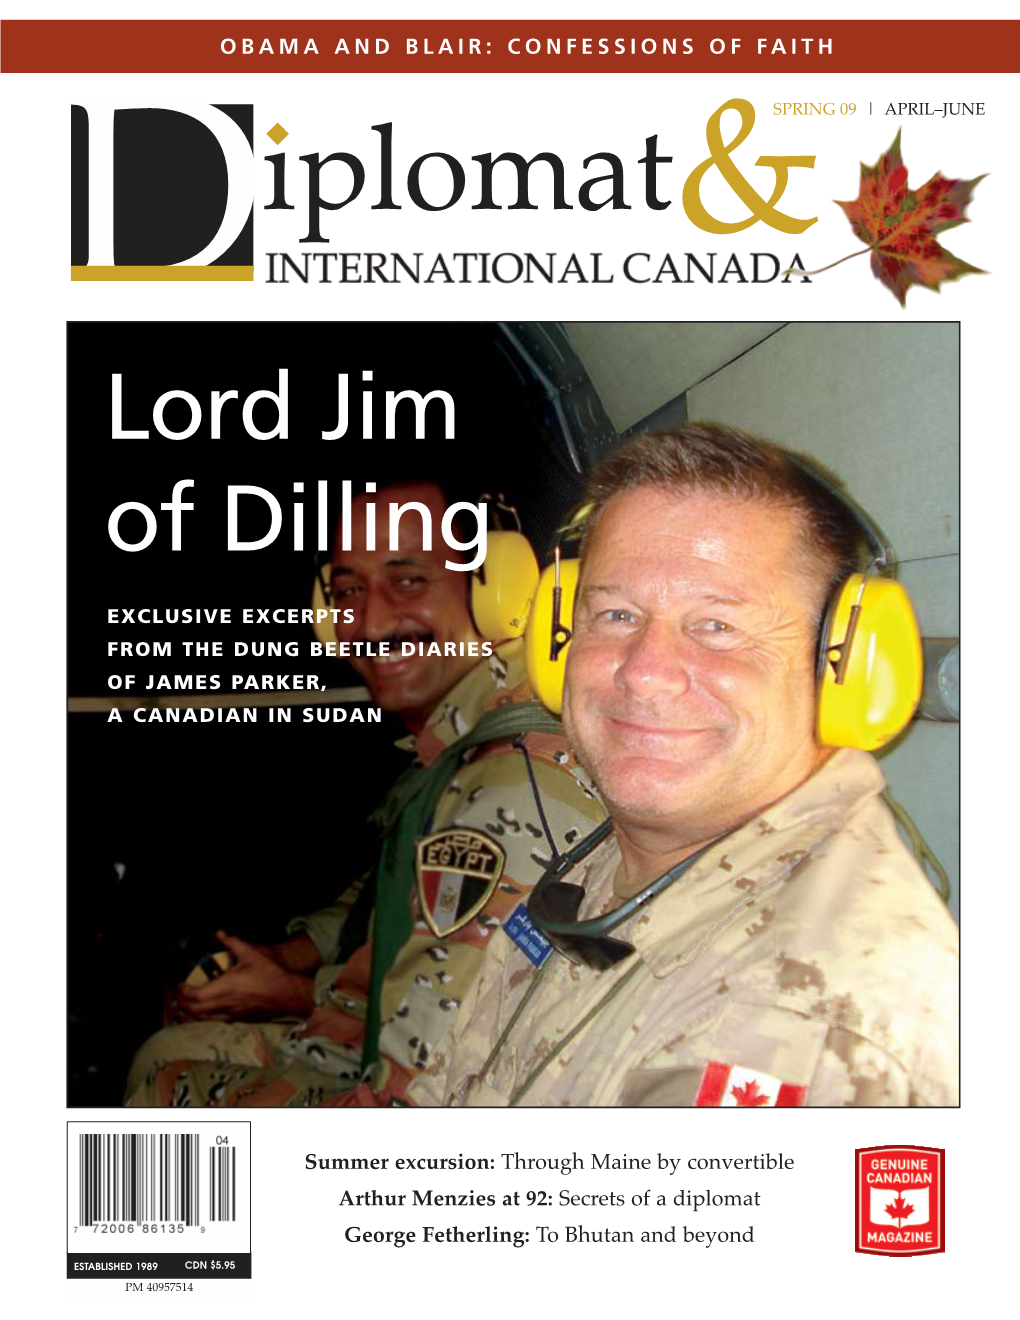 Lord Jim of Dilling